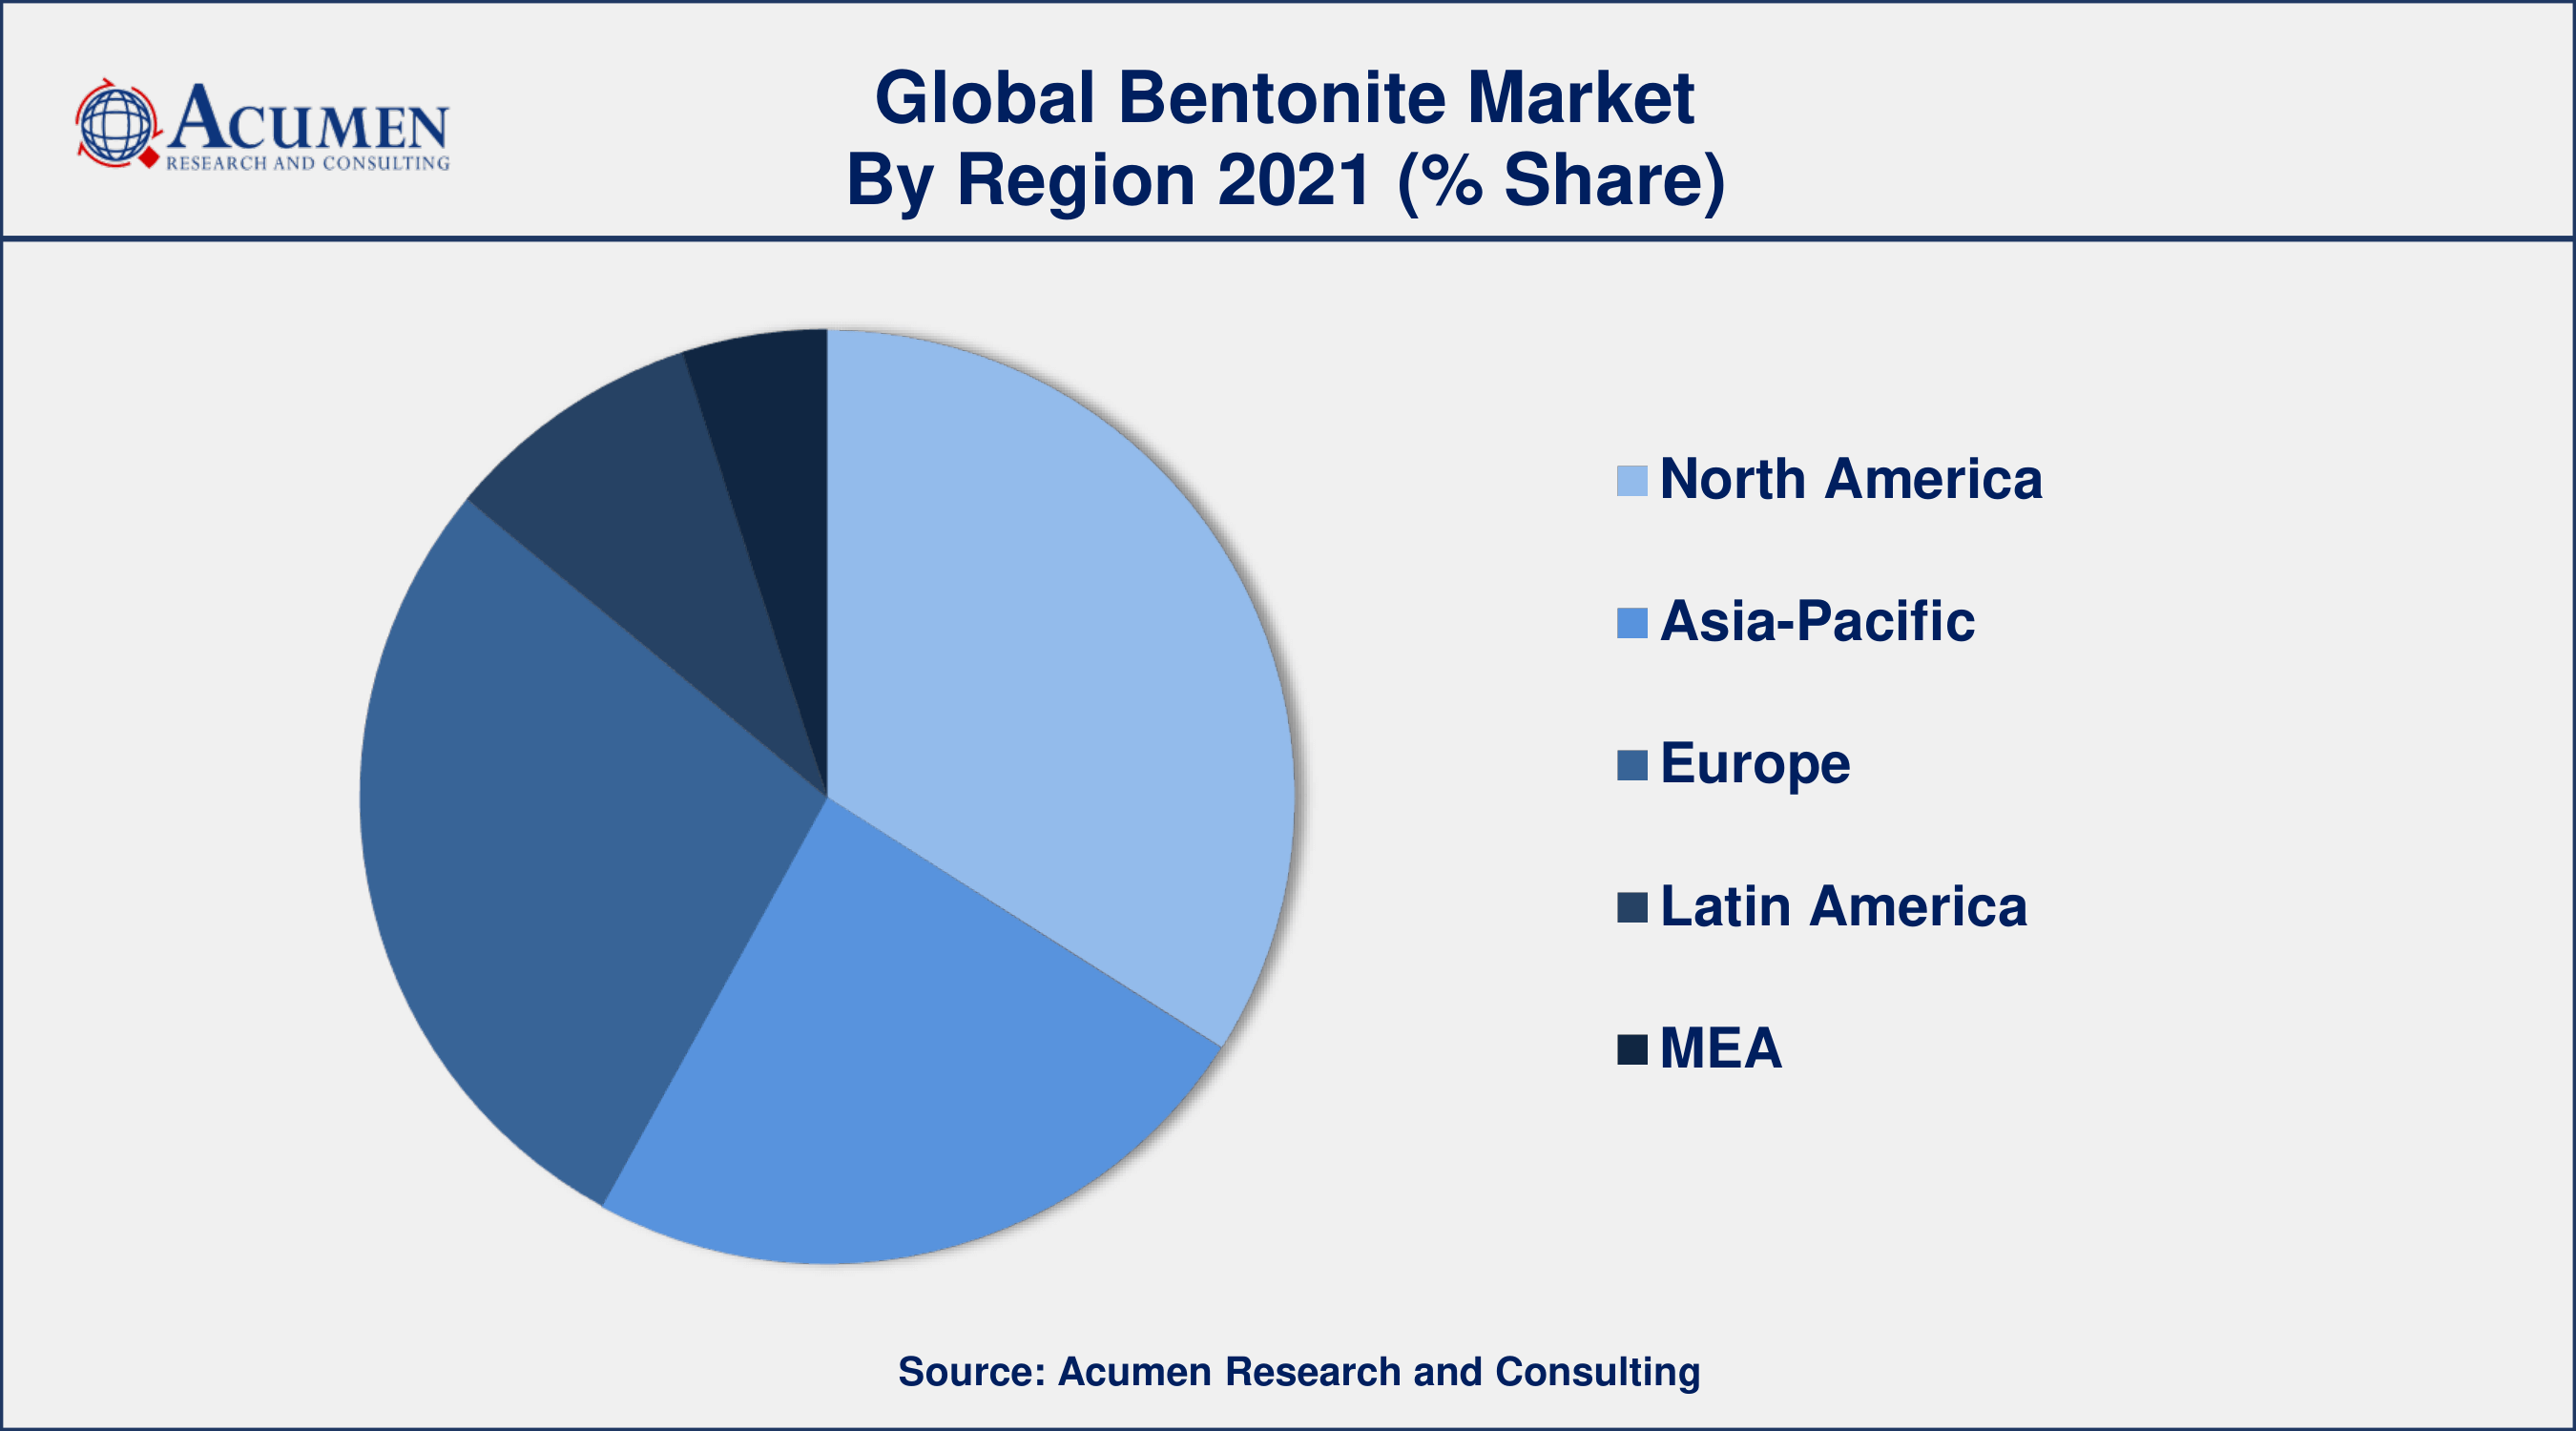 Rising demand for iron ore pellets in the steel industry, drives the bentonite market size